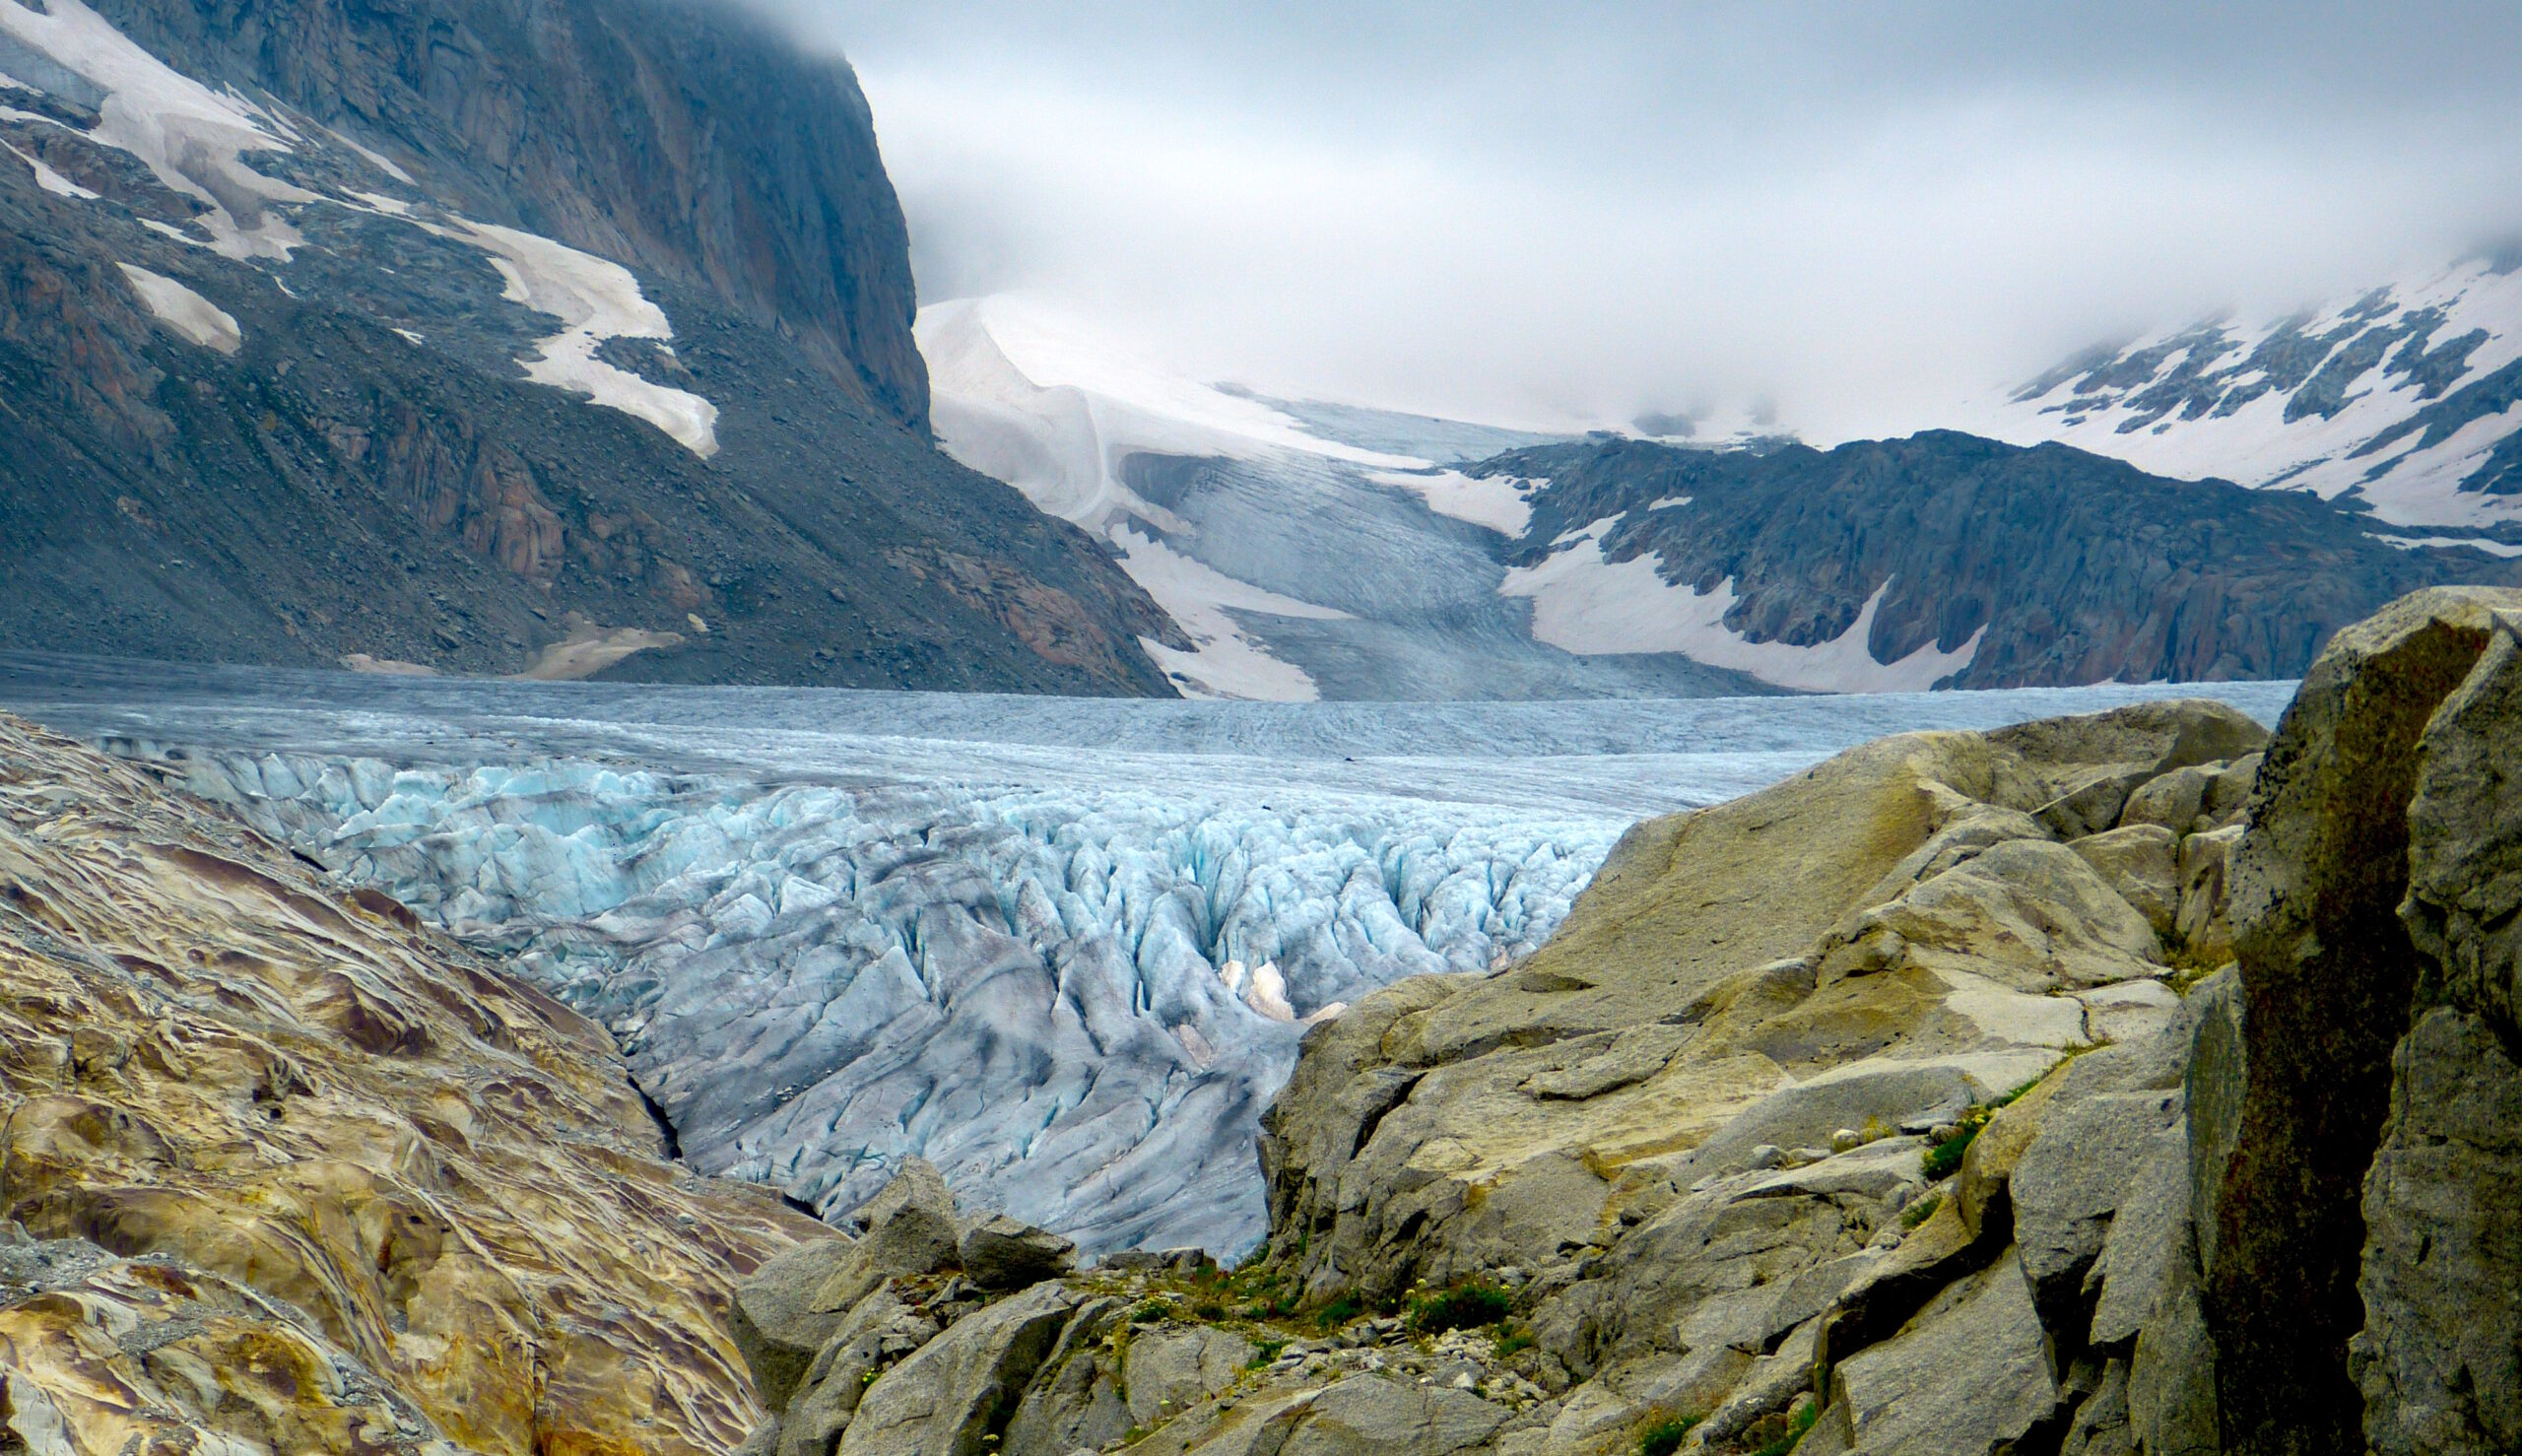 Dams Could Replace Disappearing Glaciers